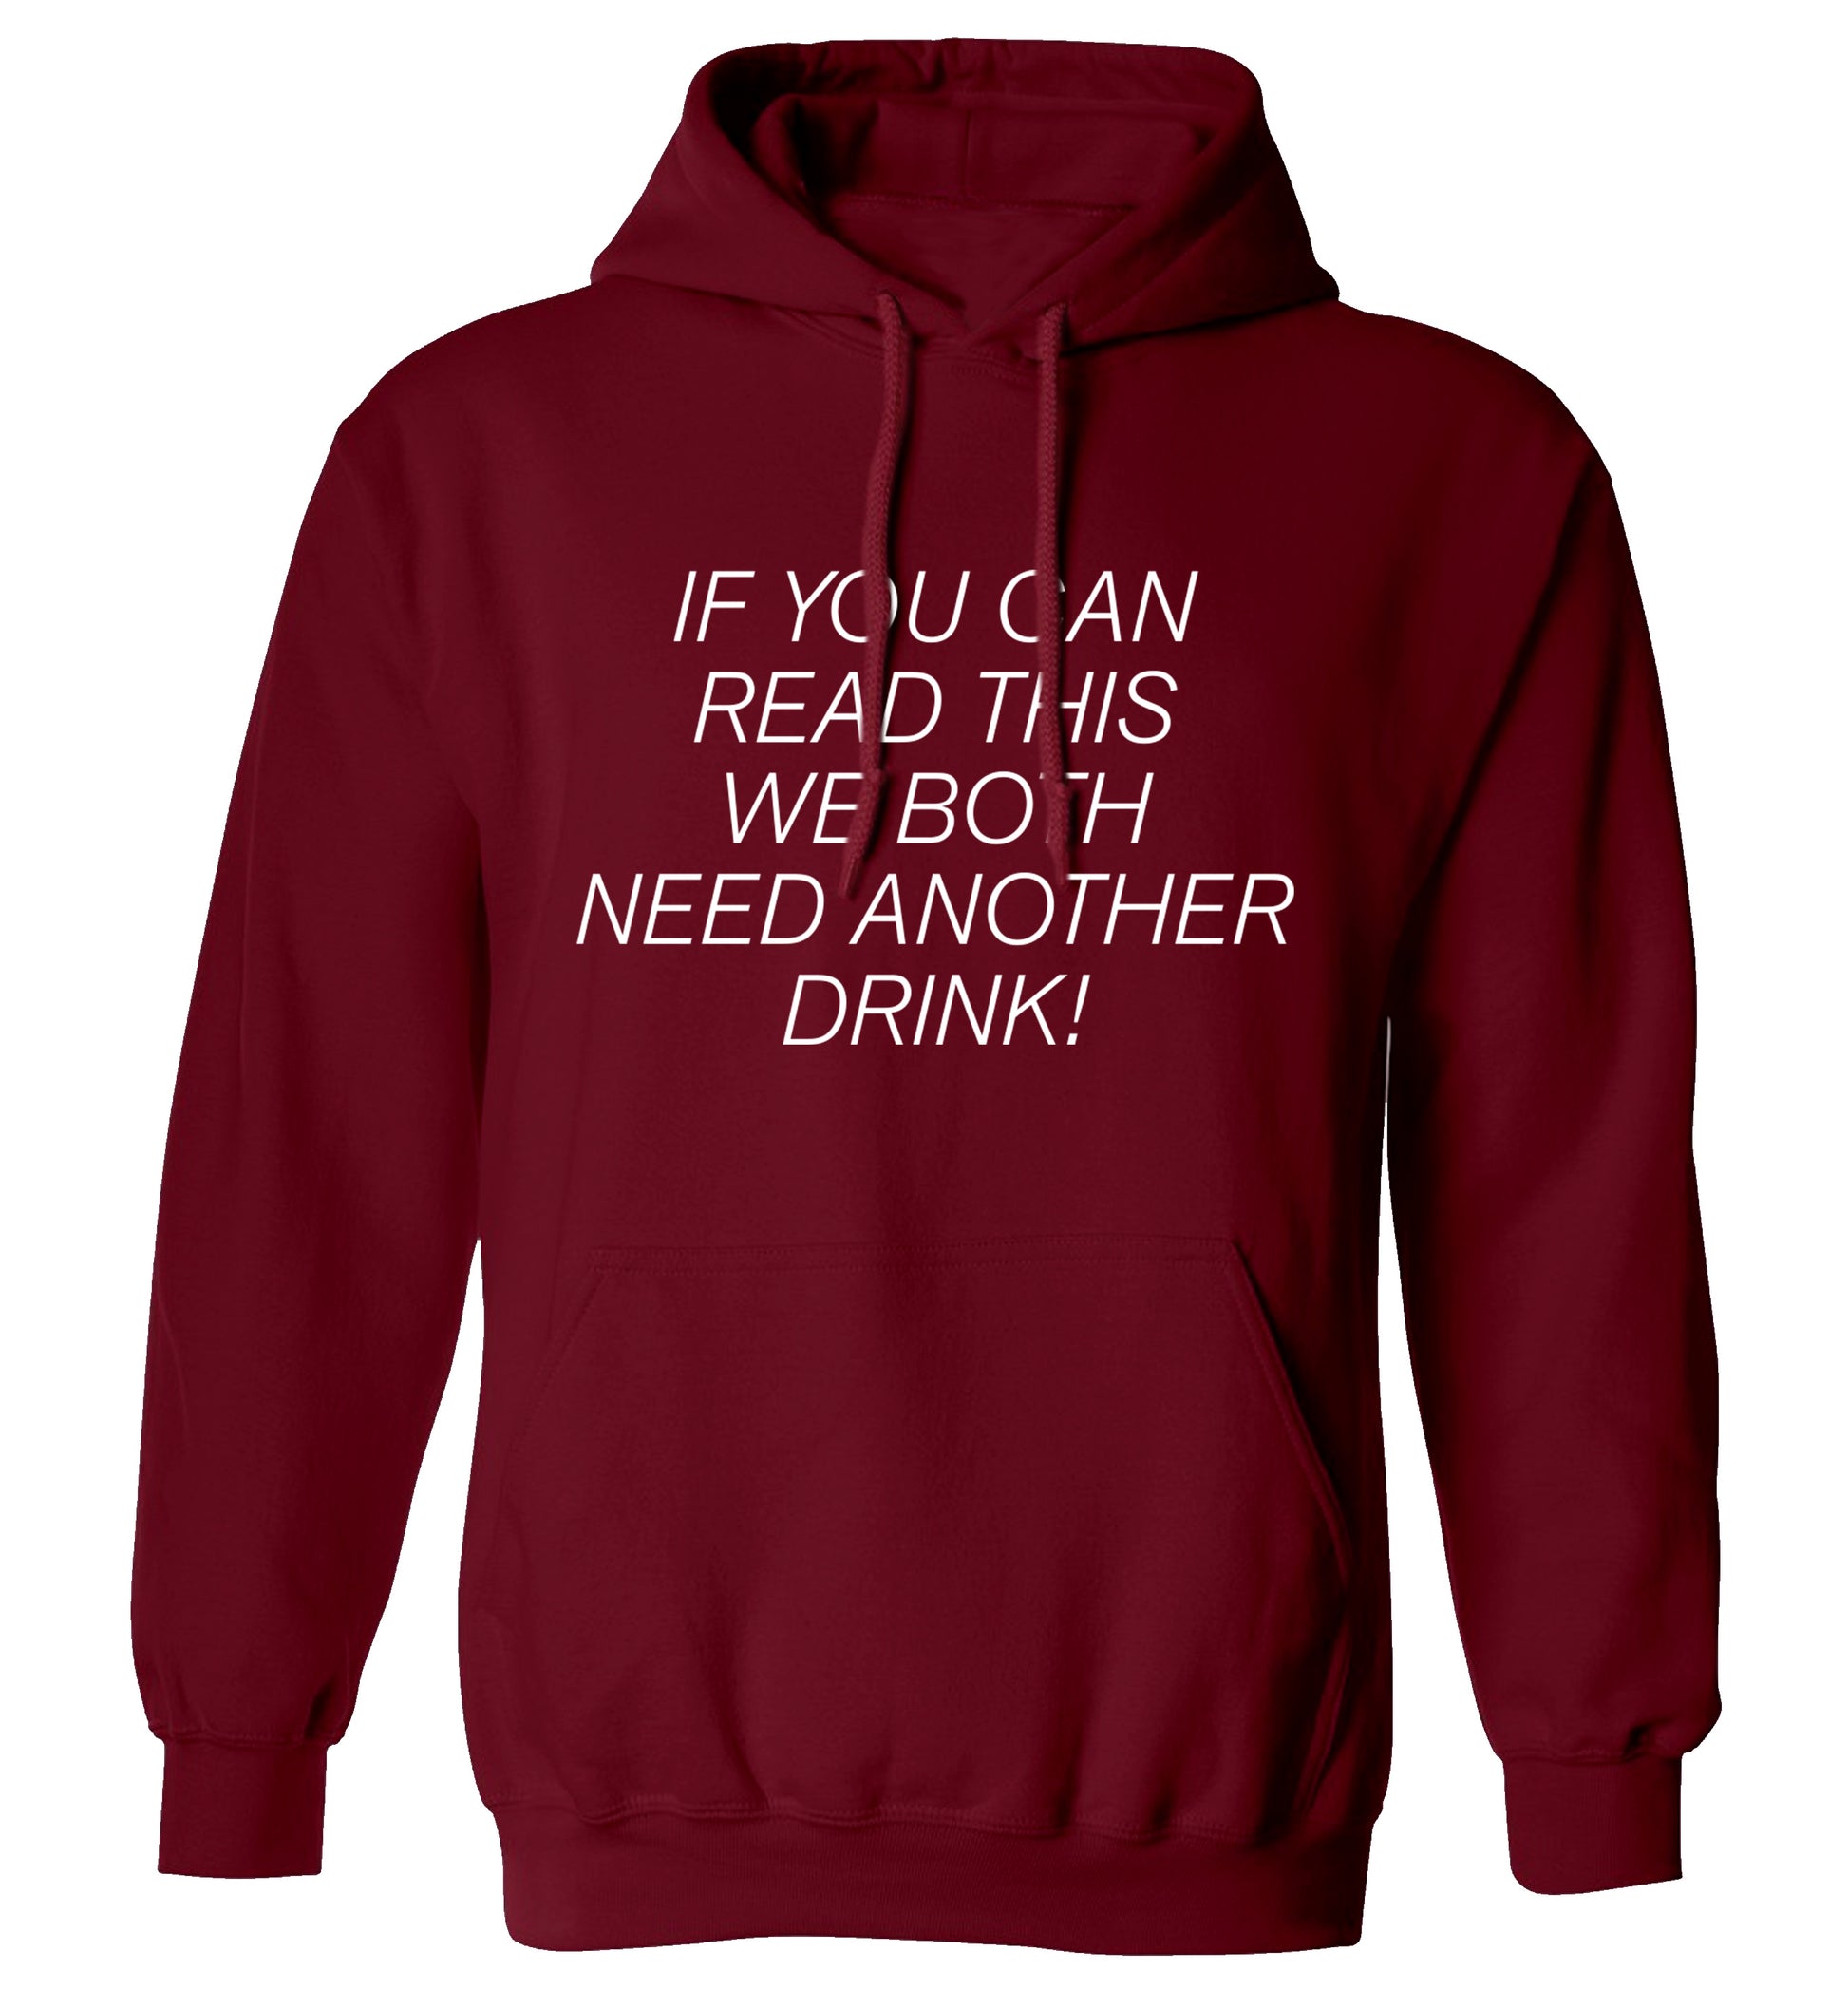 If you can read this we both need another drink! adults unisex maroon hoodie 2XL